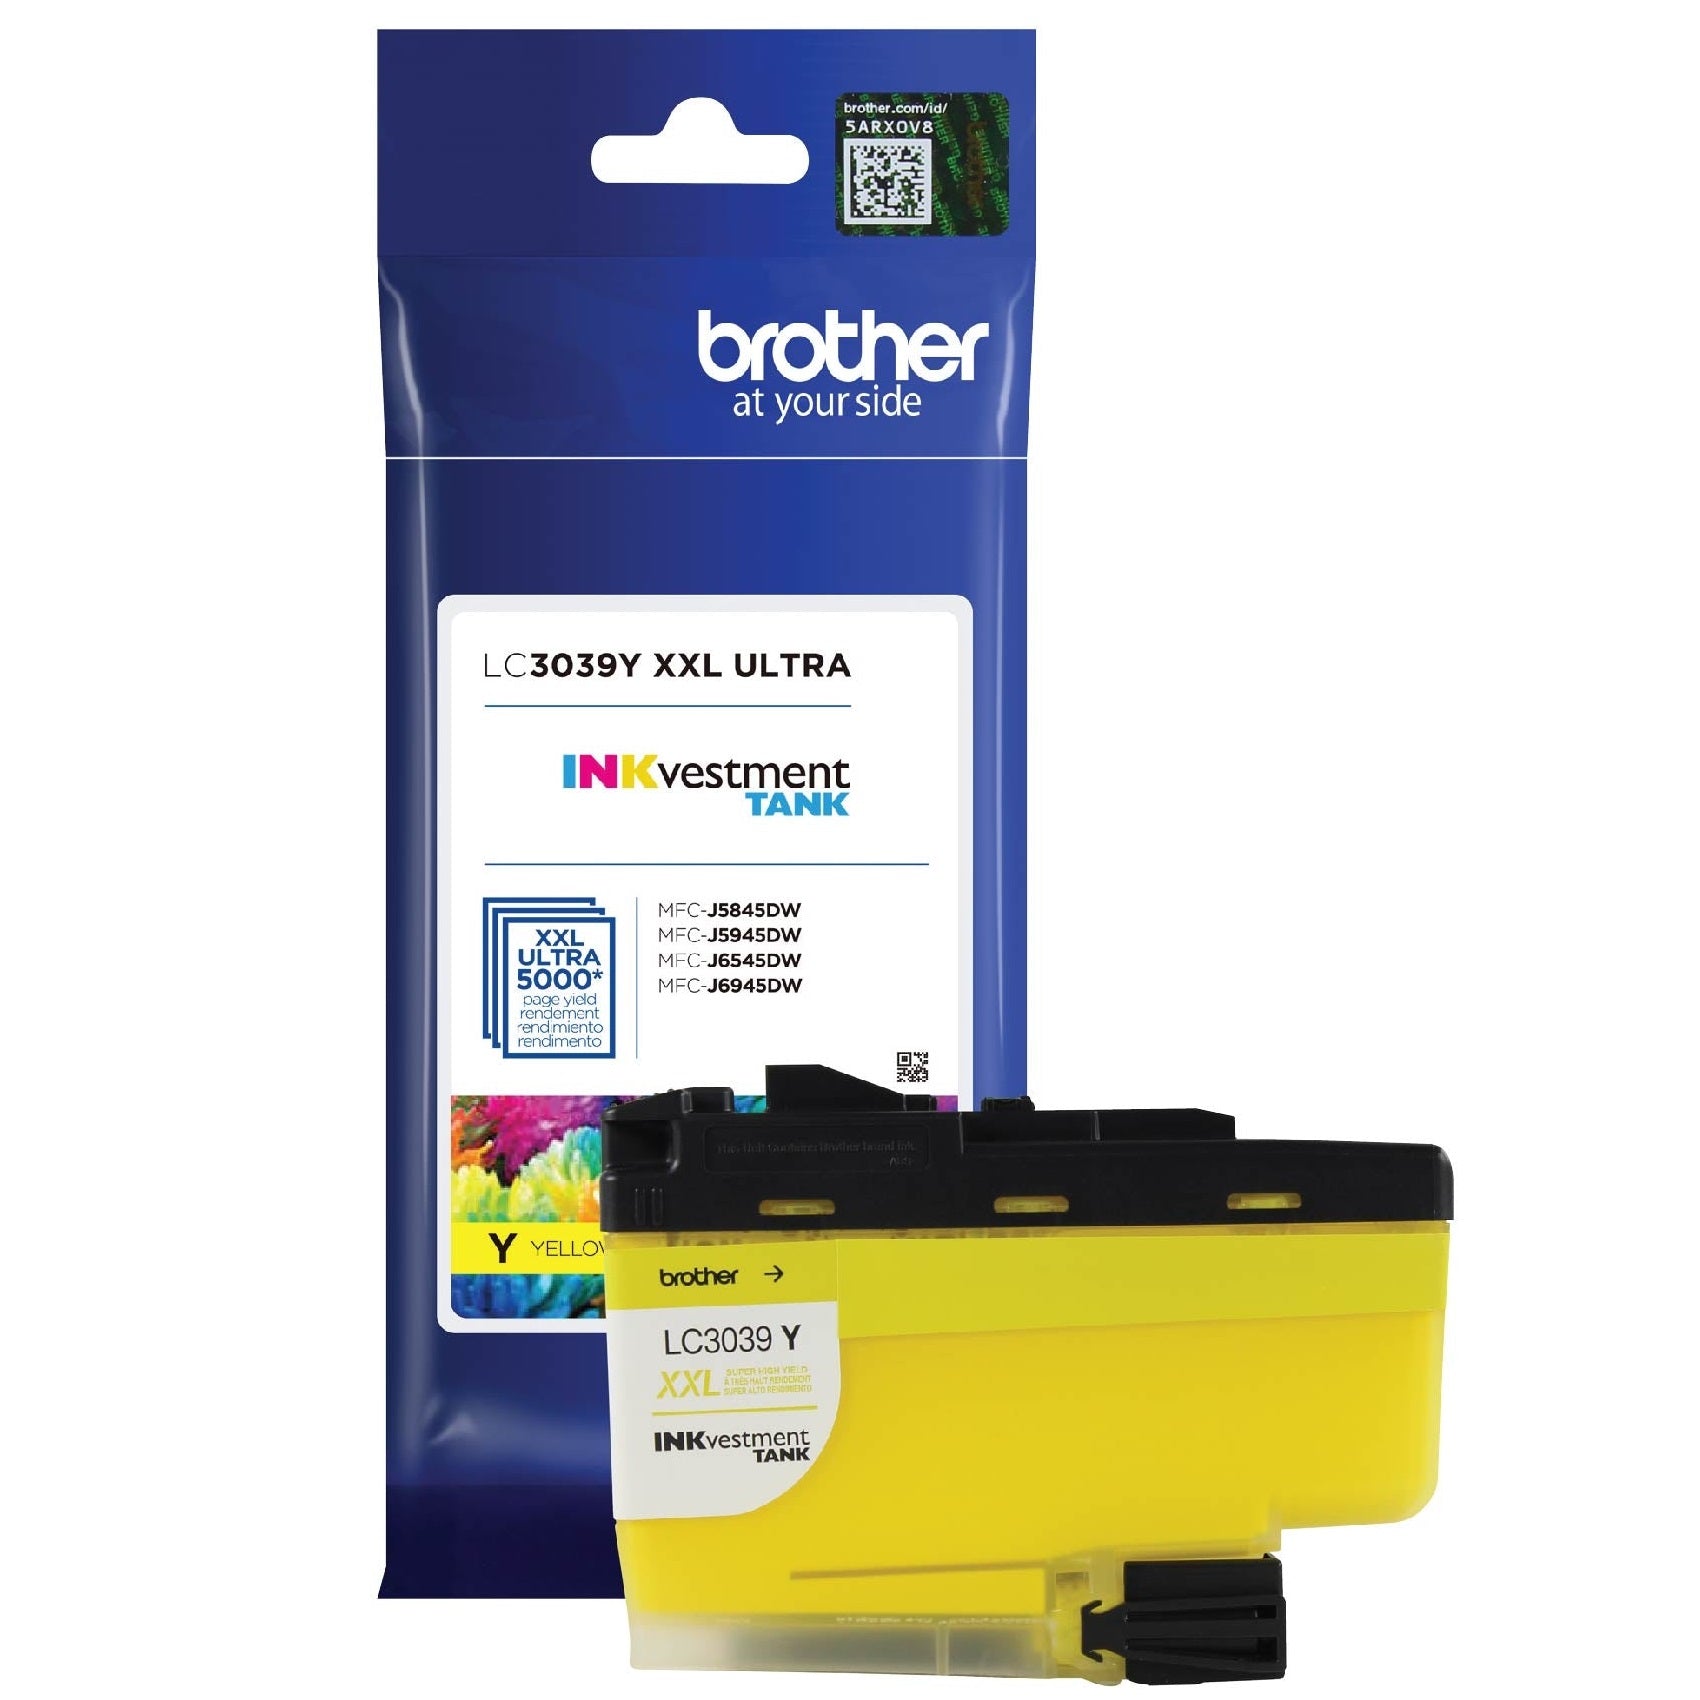 Absolute Toner Brother LC3039YS OEM Genuine High-Yield Yellow Inkvestment Tank Ink Cartridge Original Brother Cartridges